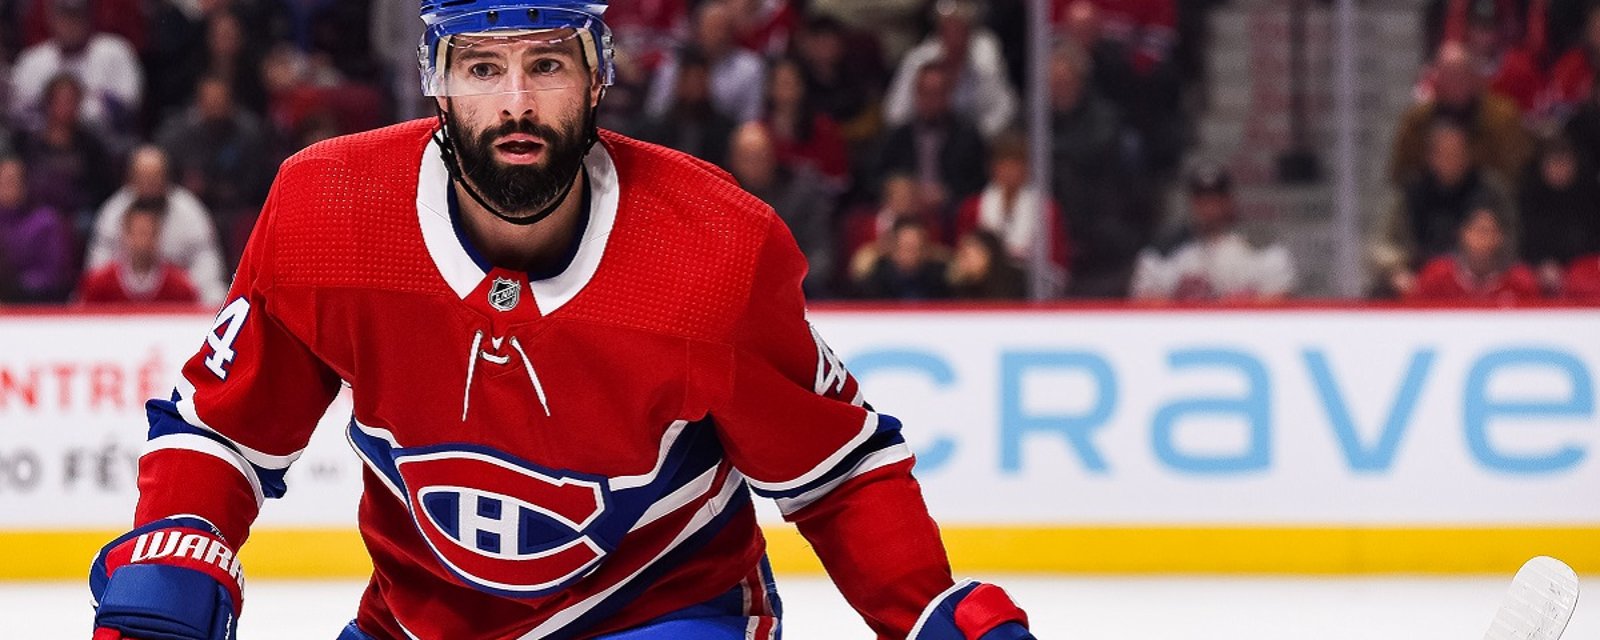 The Habs have traded Nate Thompson!